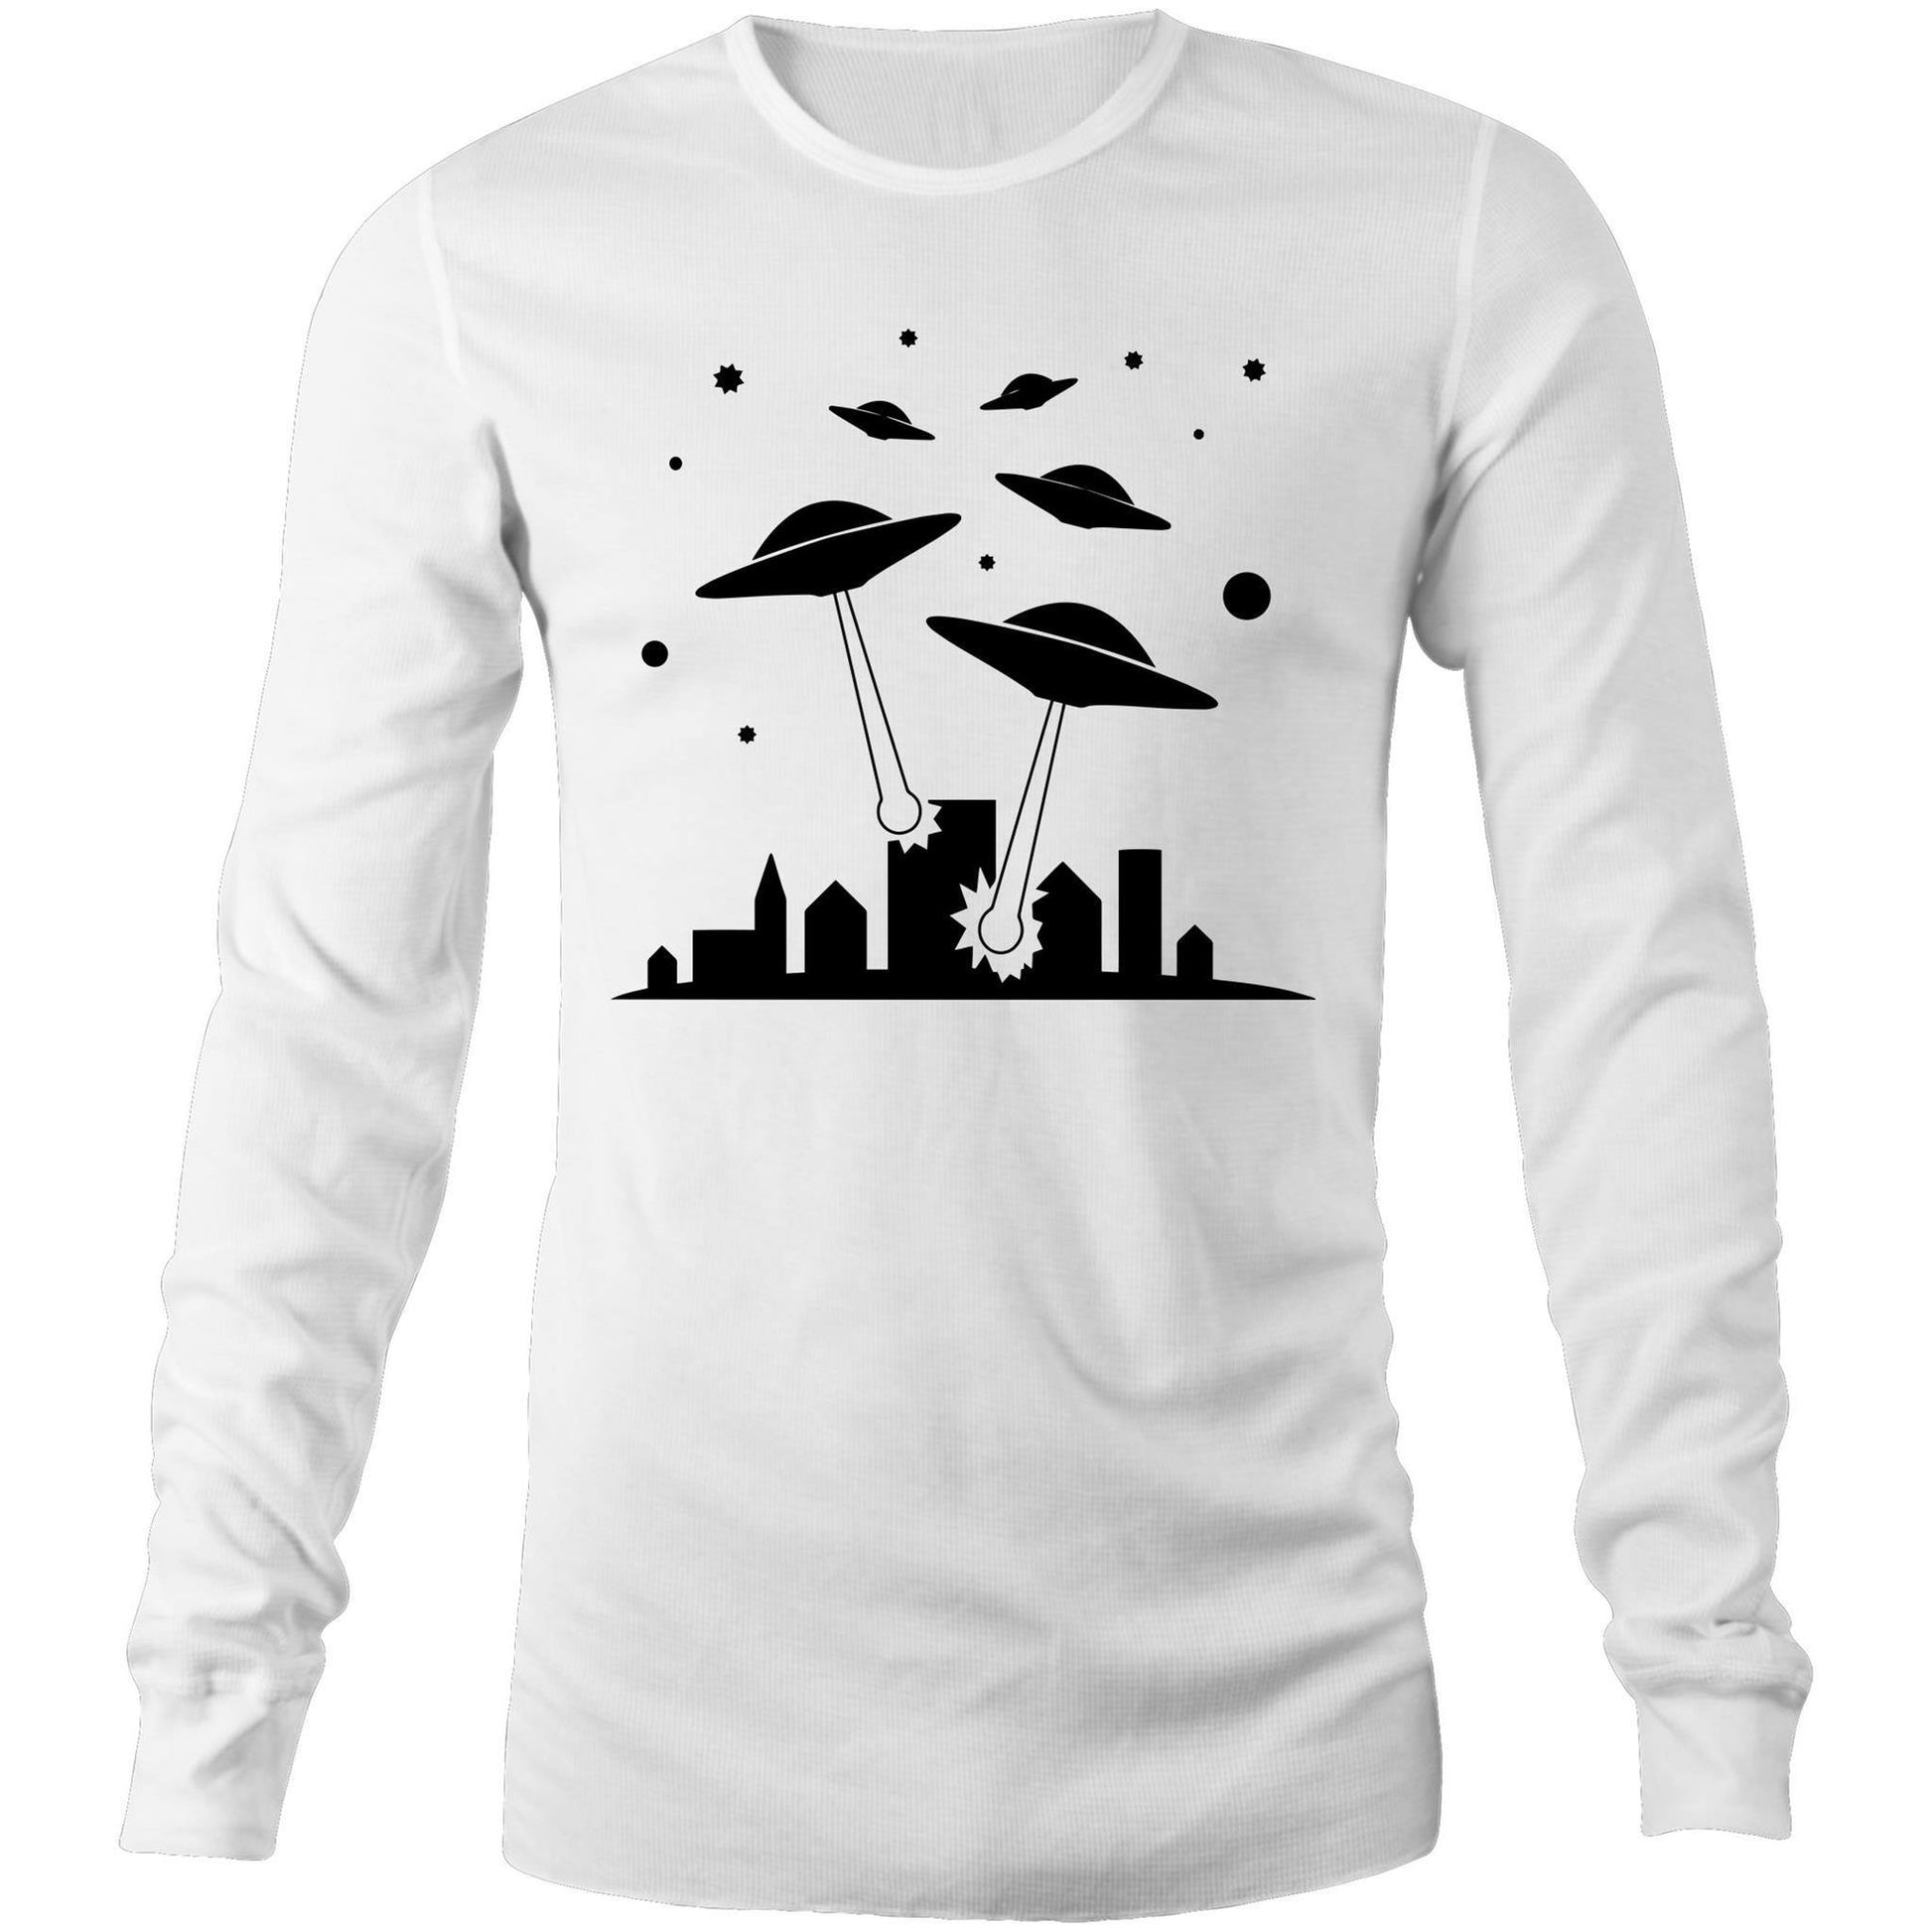 Space Invasion - Long Sleeve T-Shirt White Unisex Long Sleeve T-shirt Mens Retro Sci Fi Space Womens